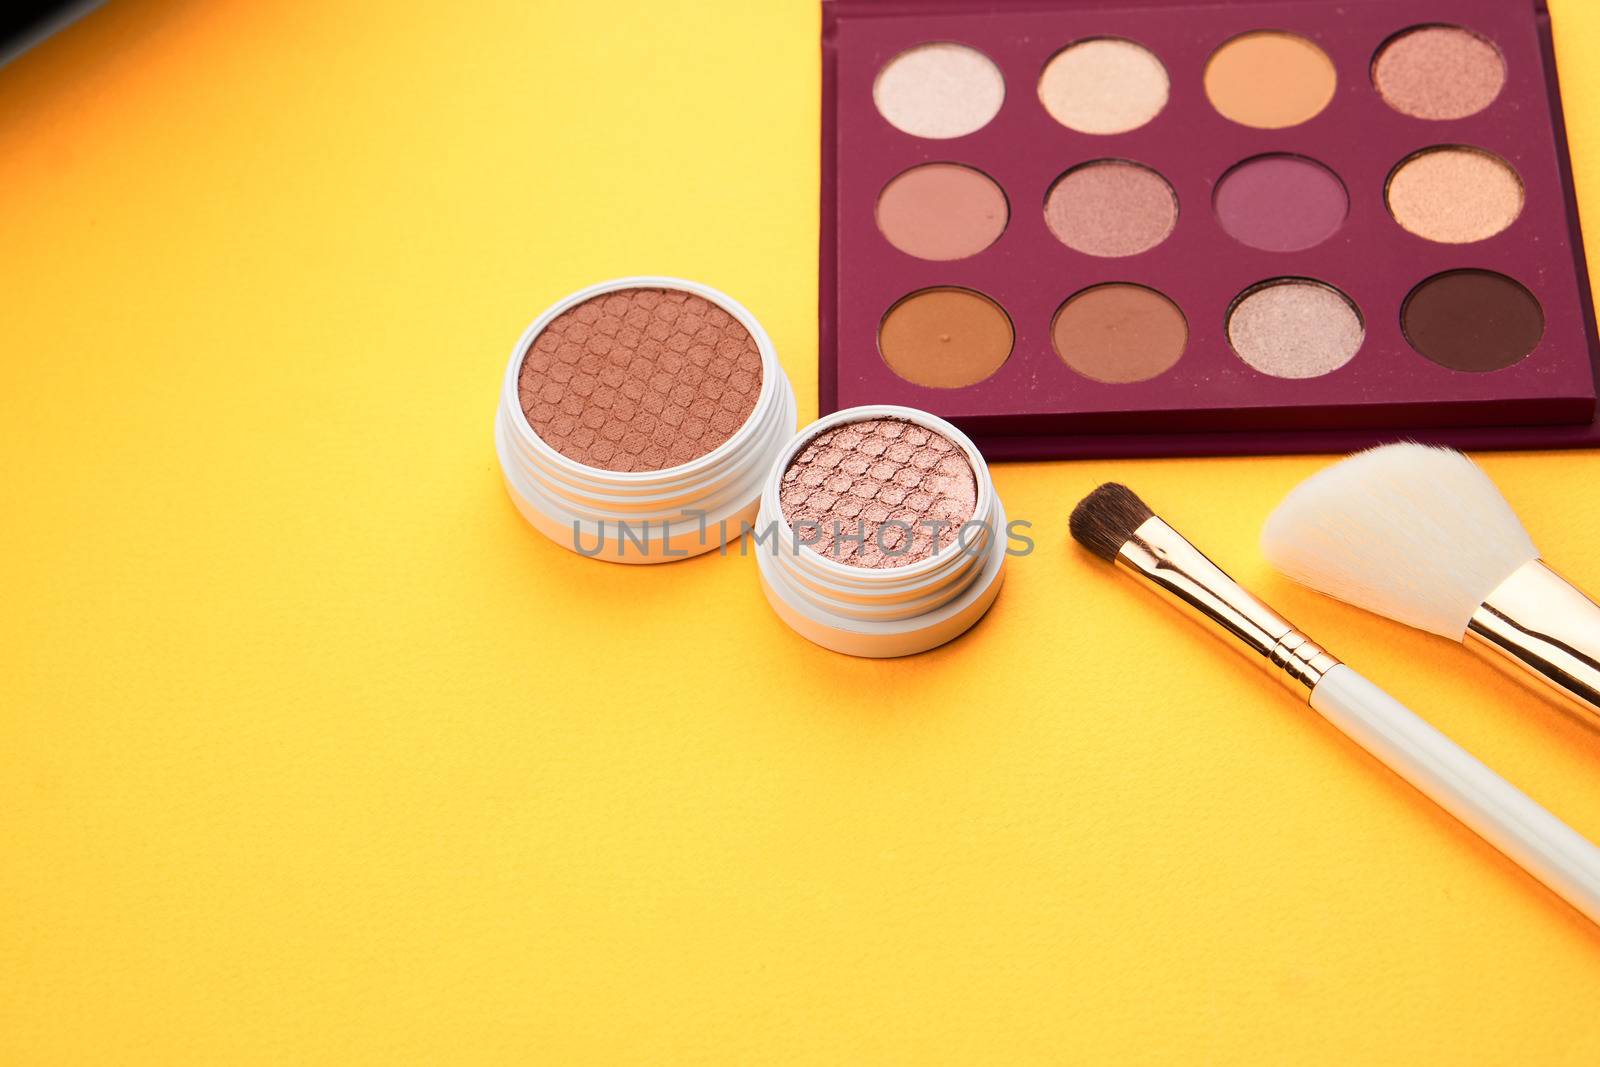 Professional eyeshadows and makeup brushes on a yellow background make-up decoration by SHOTPRIME